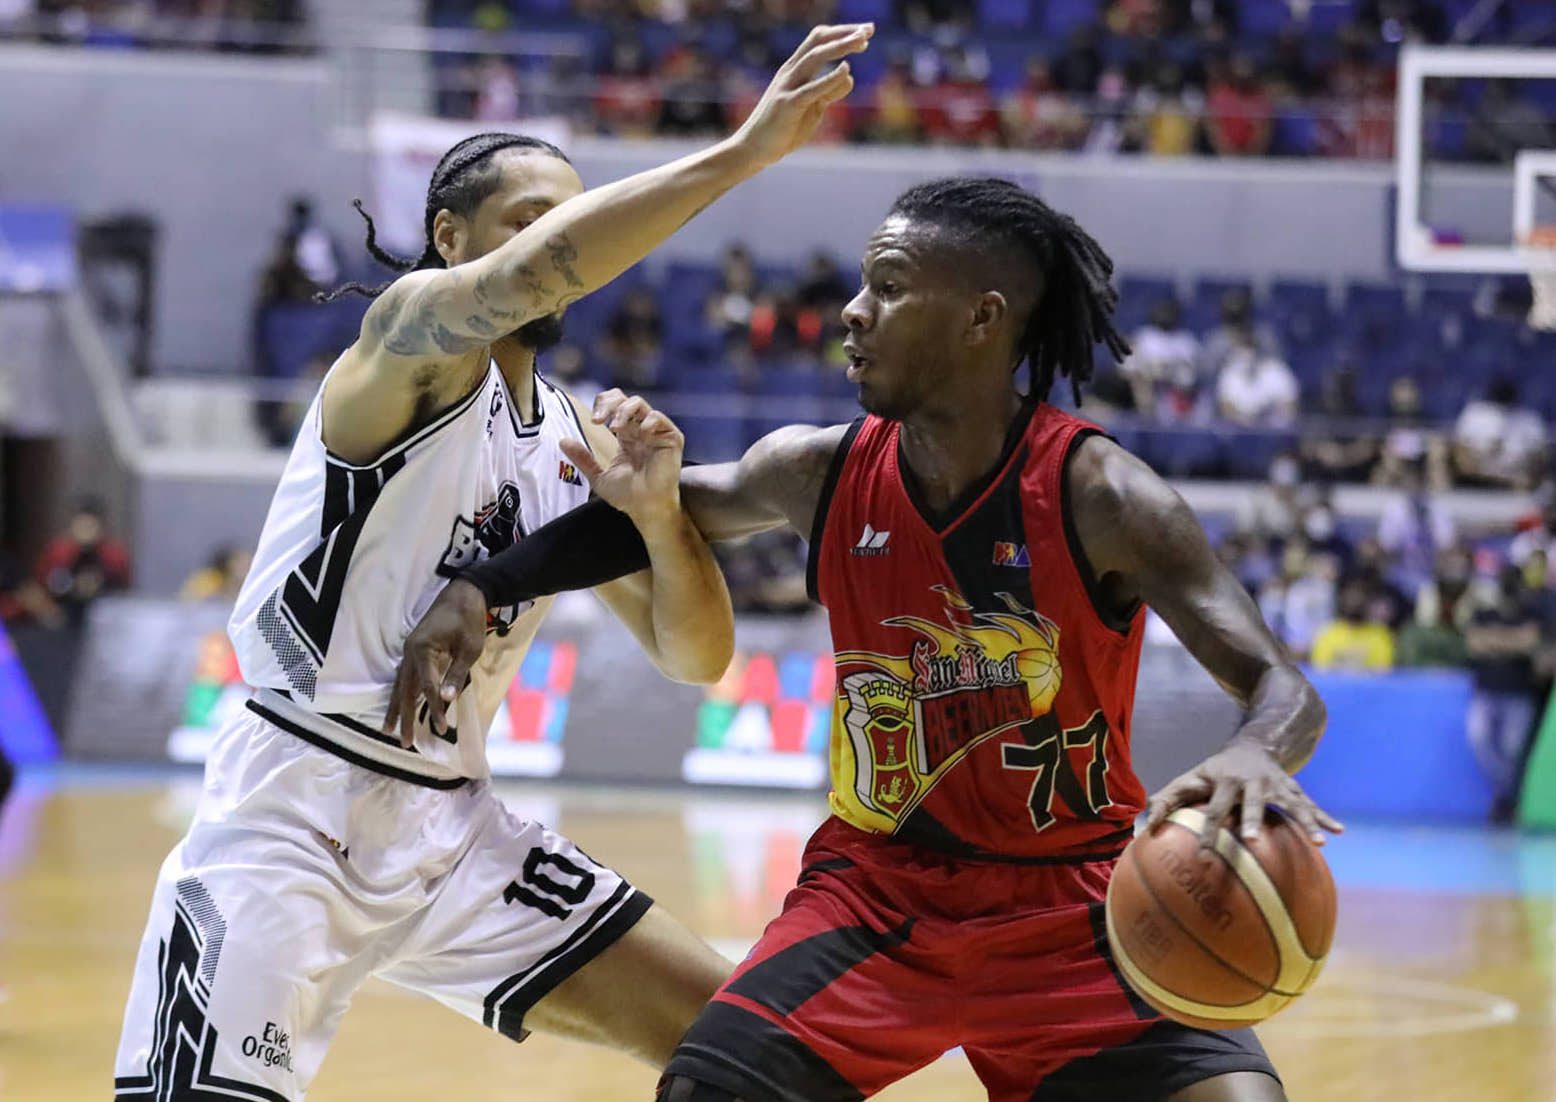 San Miguel drubs Blackwater by 30 points to nail PBA semis spot with ease